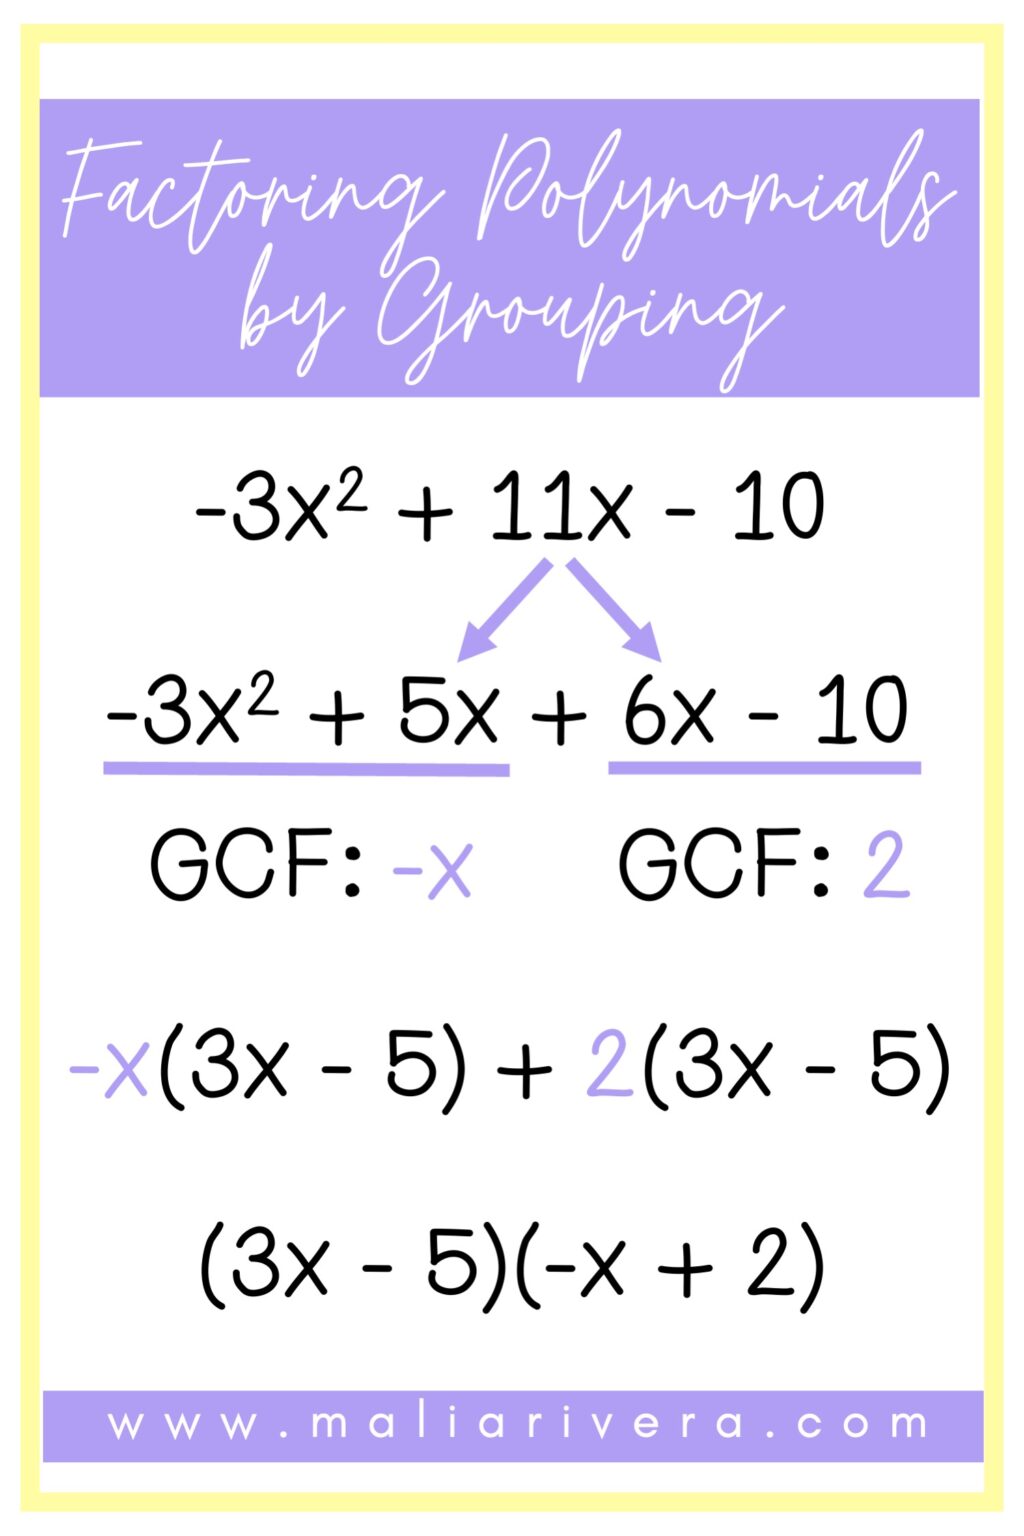 how-to-factor-polynomials-with-4-terms-4-3-factoring-polynomials-of